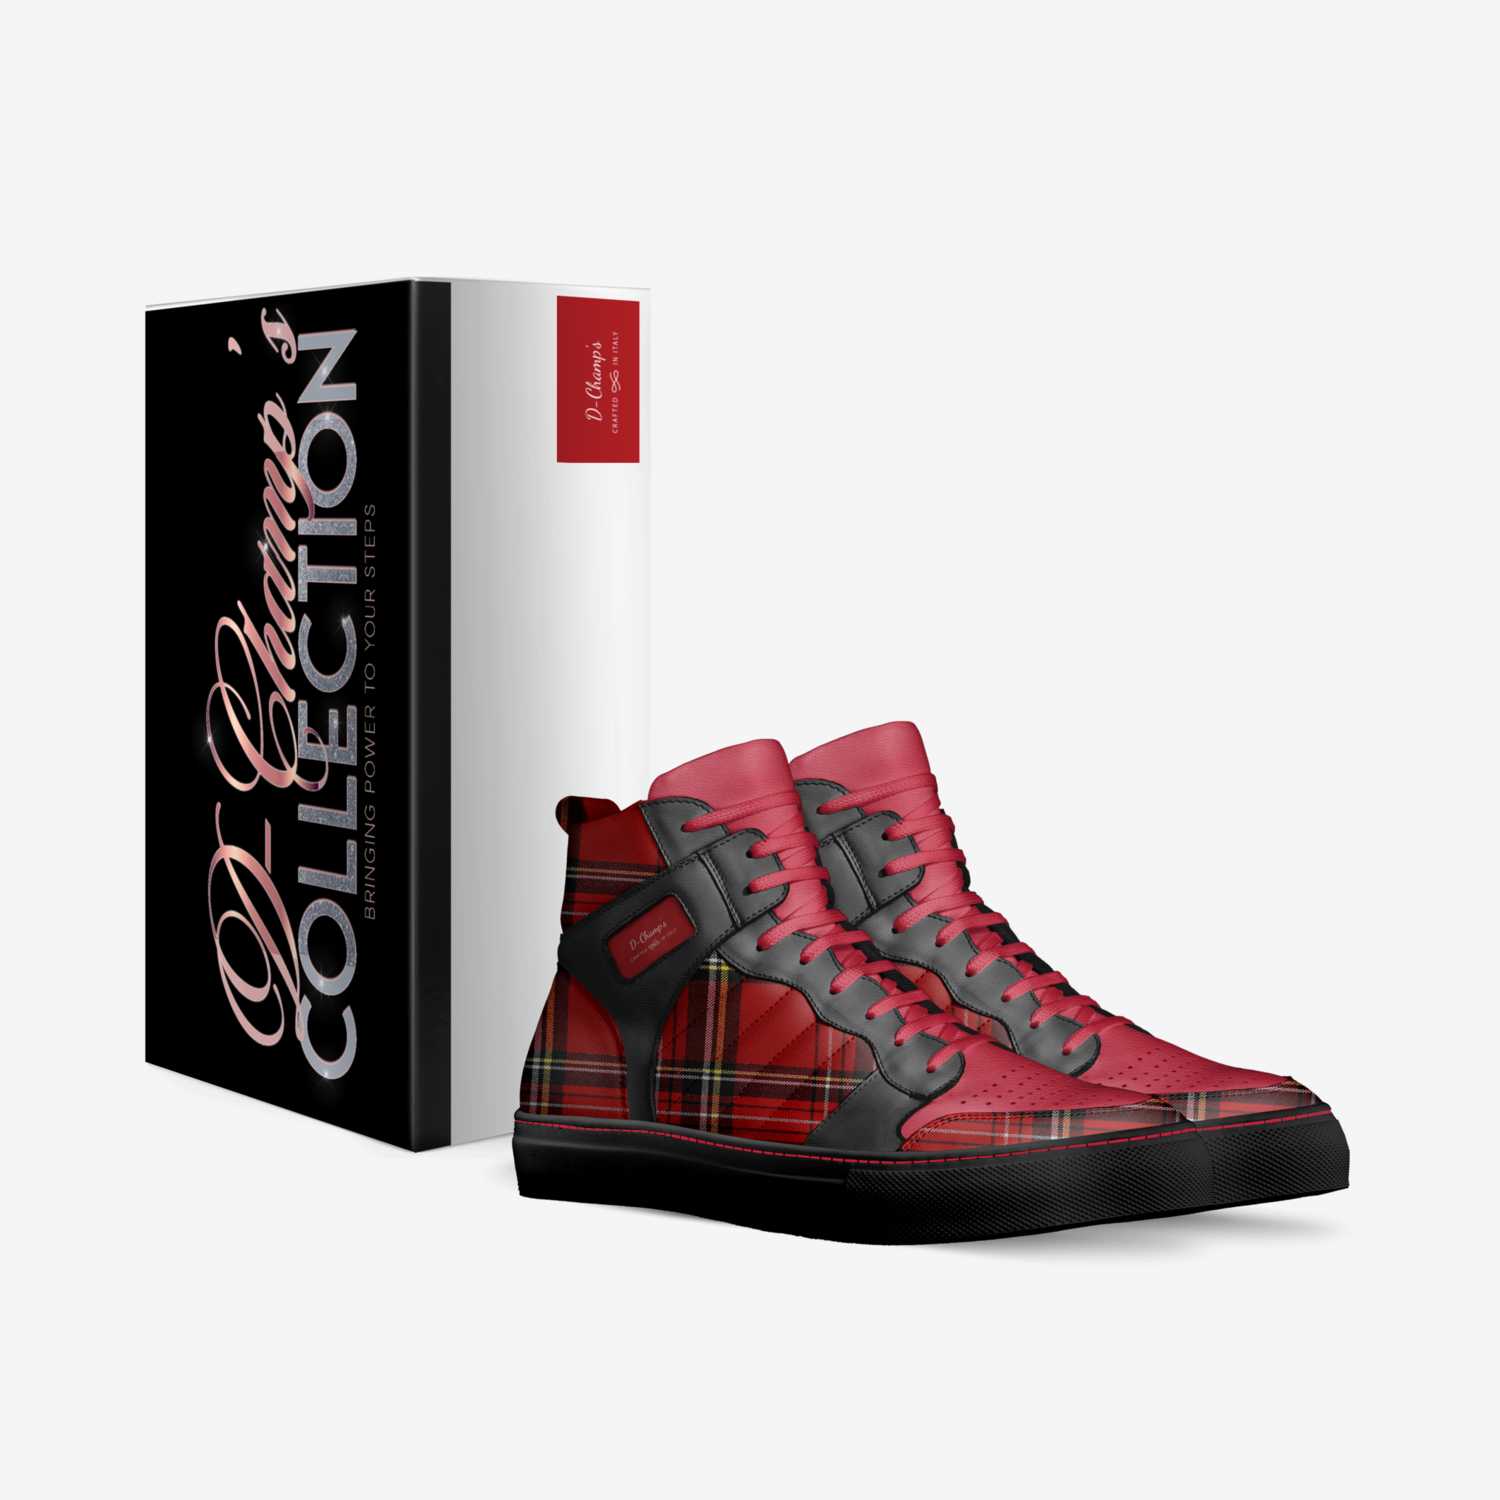 D-Champ’s custom made in Italy shoes by De-borah Champion | Box view